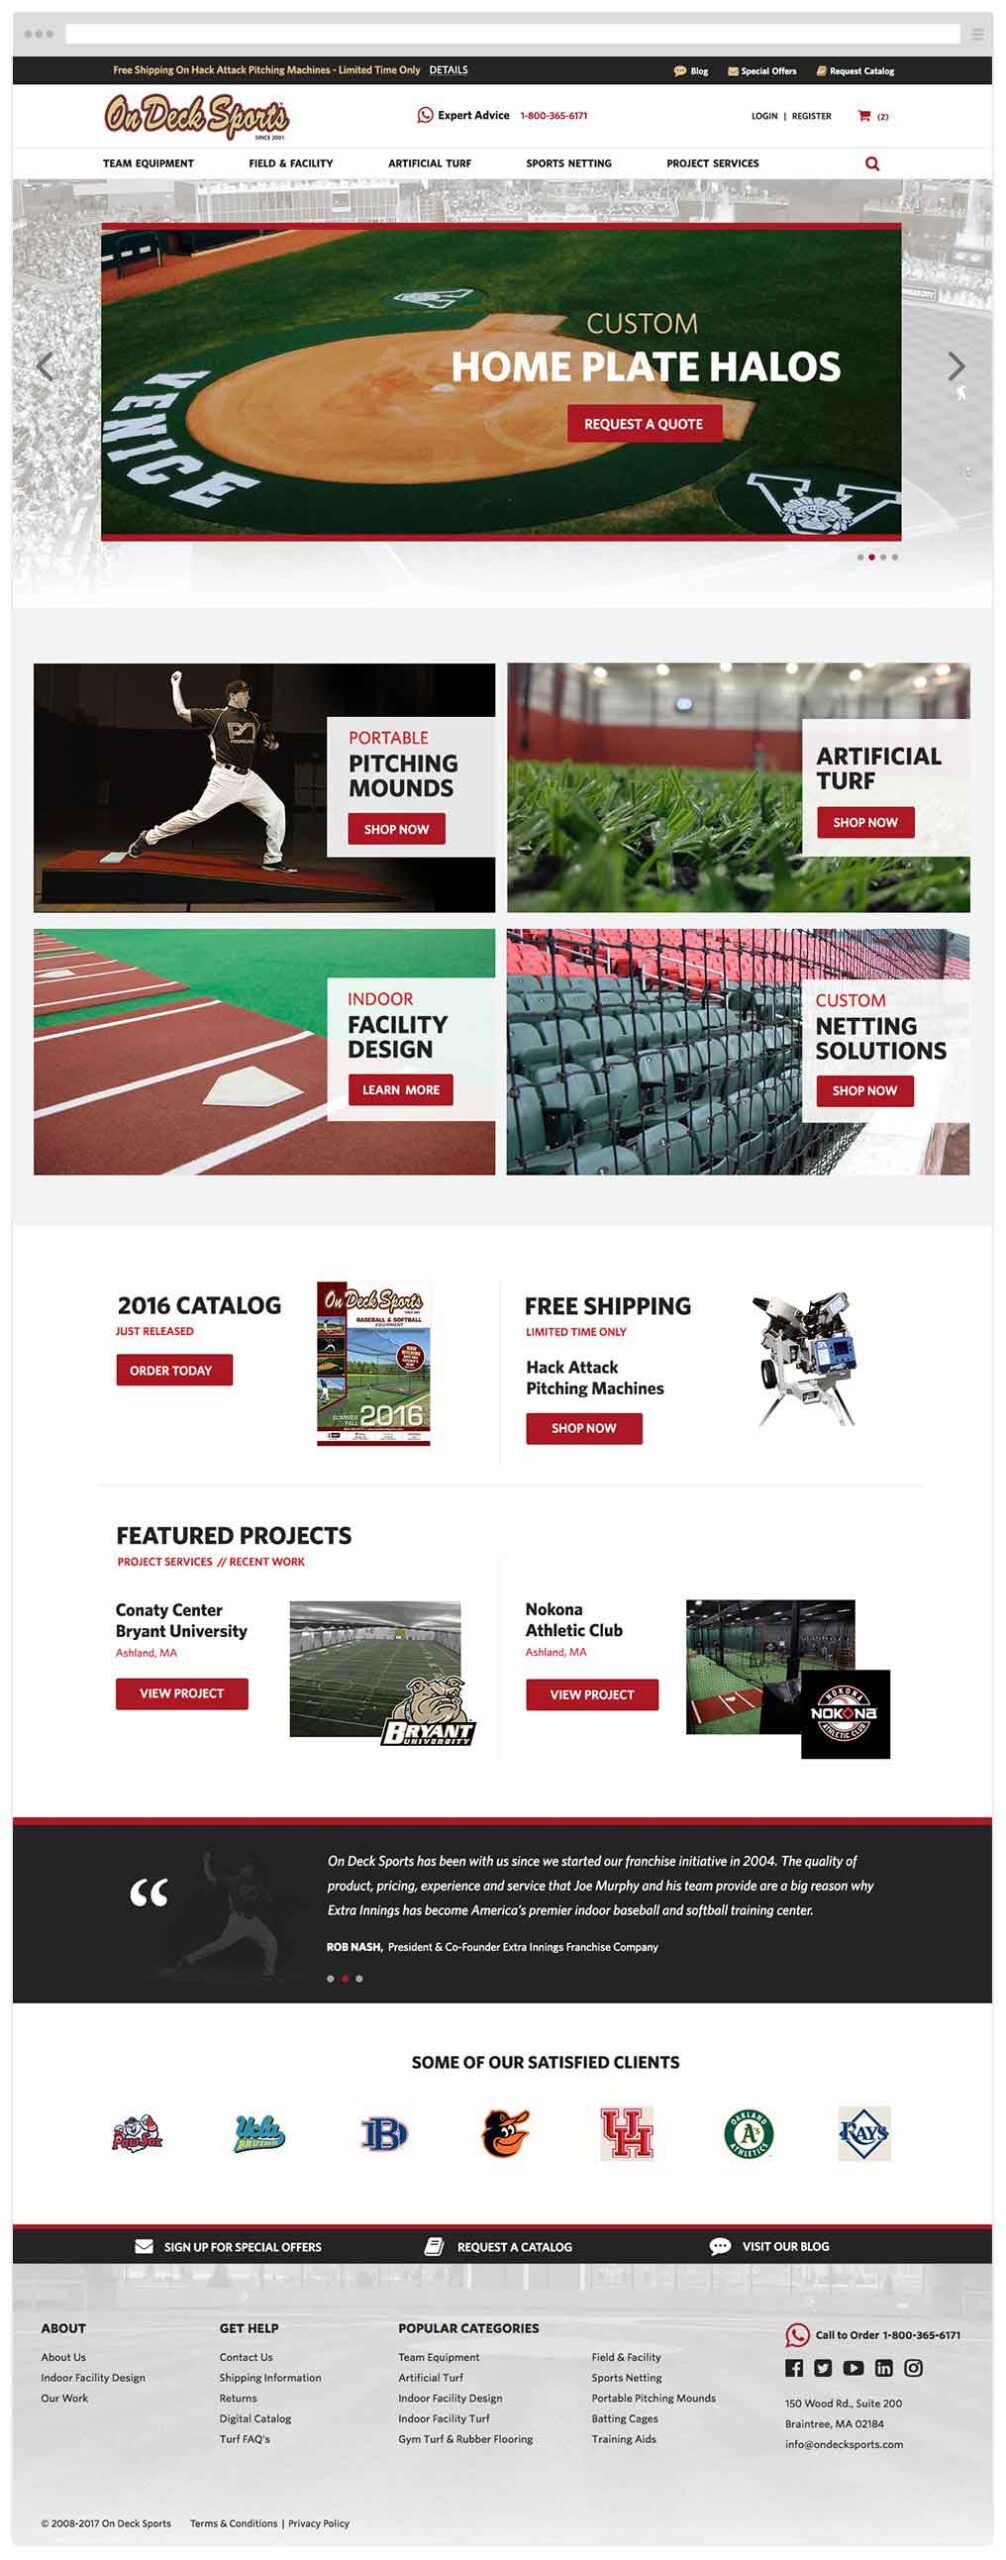 On Deck Sports SuiteCommerce home